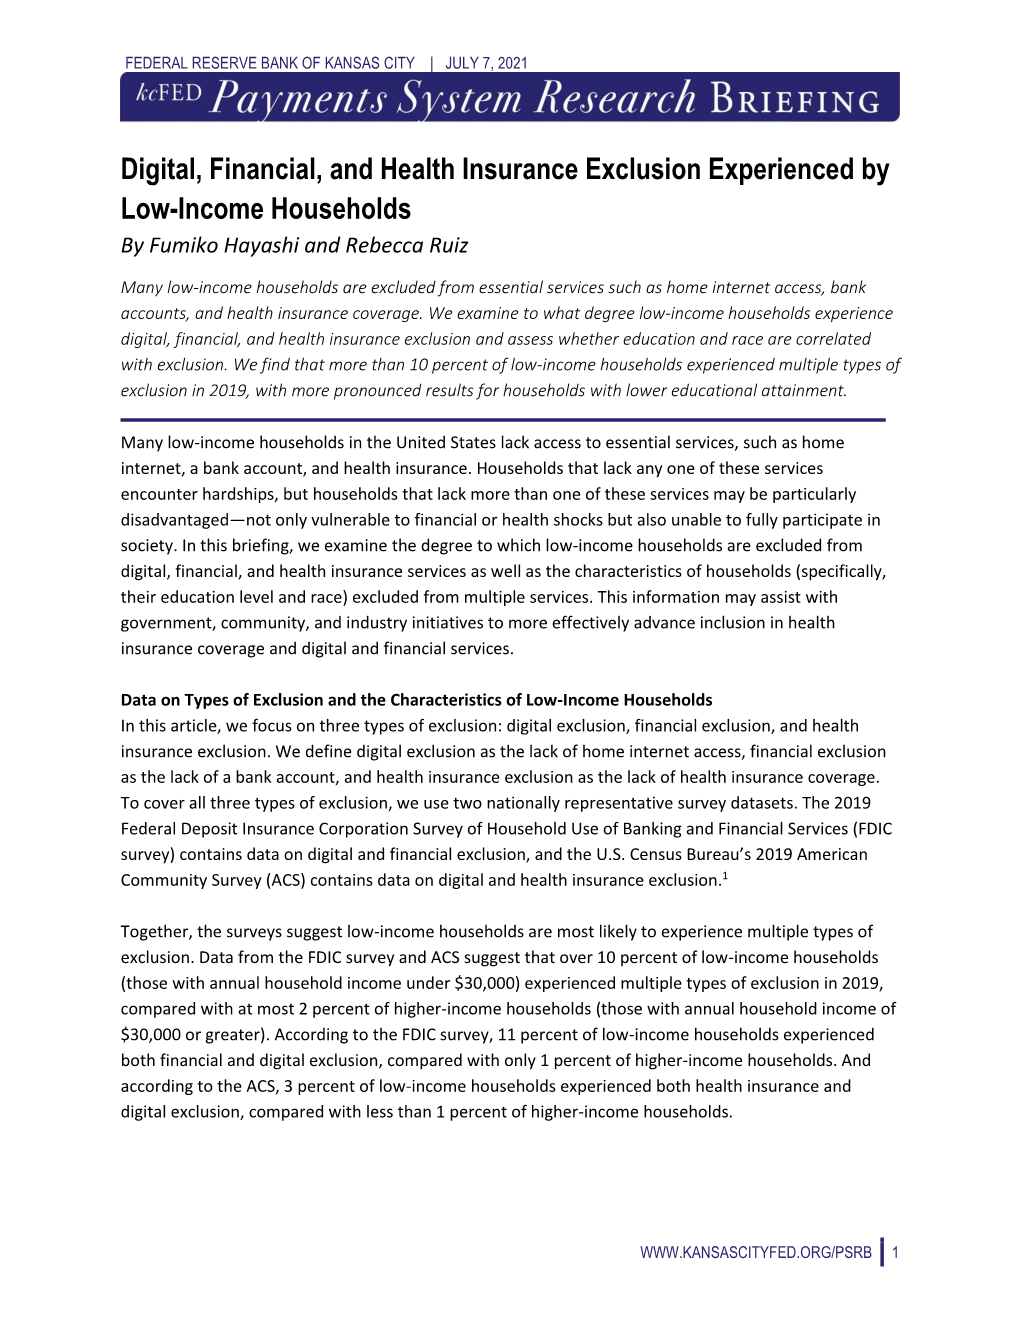 Digital, Financial, and Health Insurance Exclusion Experienced by Low-Income Households by Fumiko Hayashi and Rebecca Ruiz